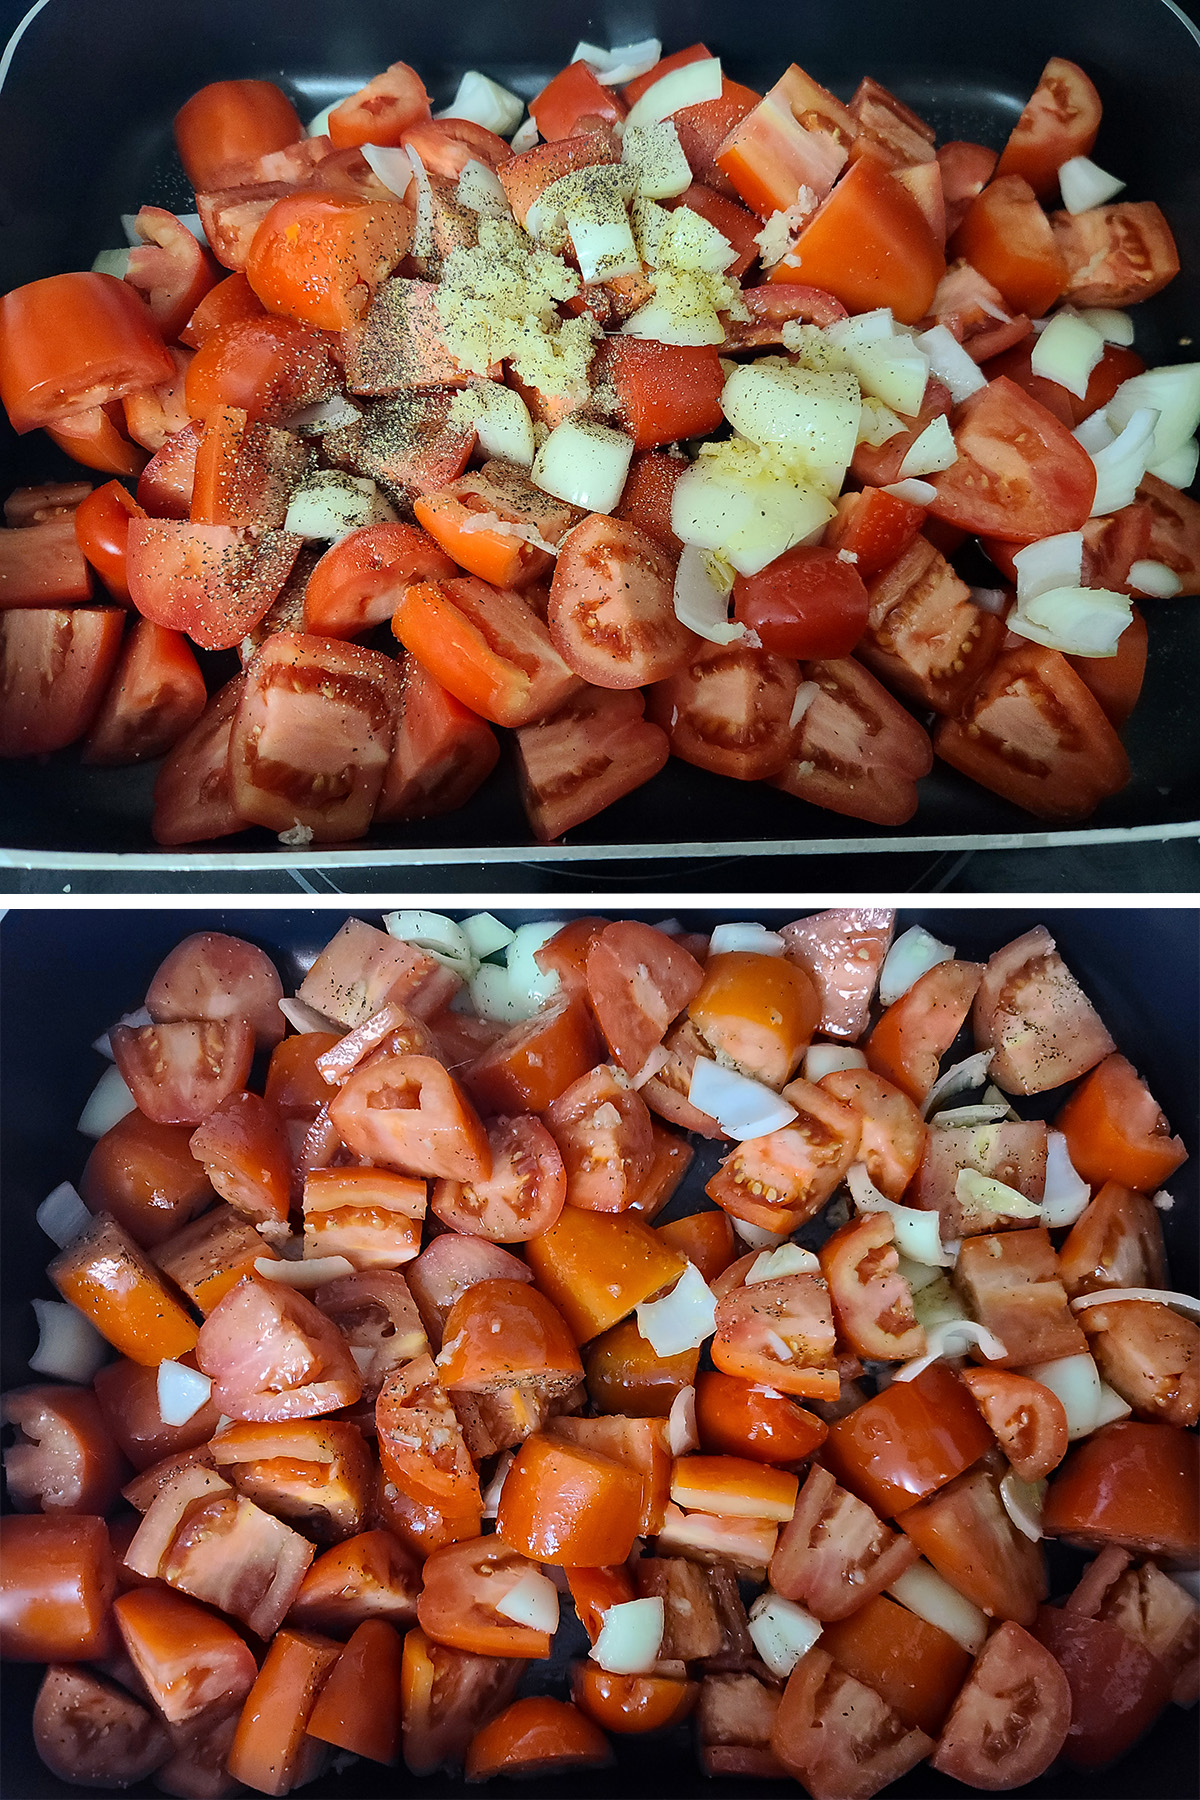 A two part image of tomatoes and onions in a roasted pan.